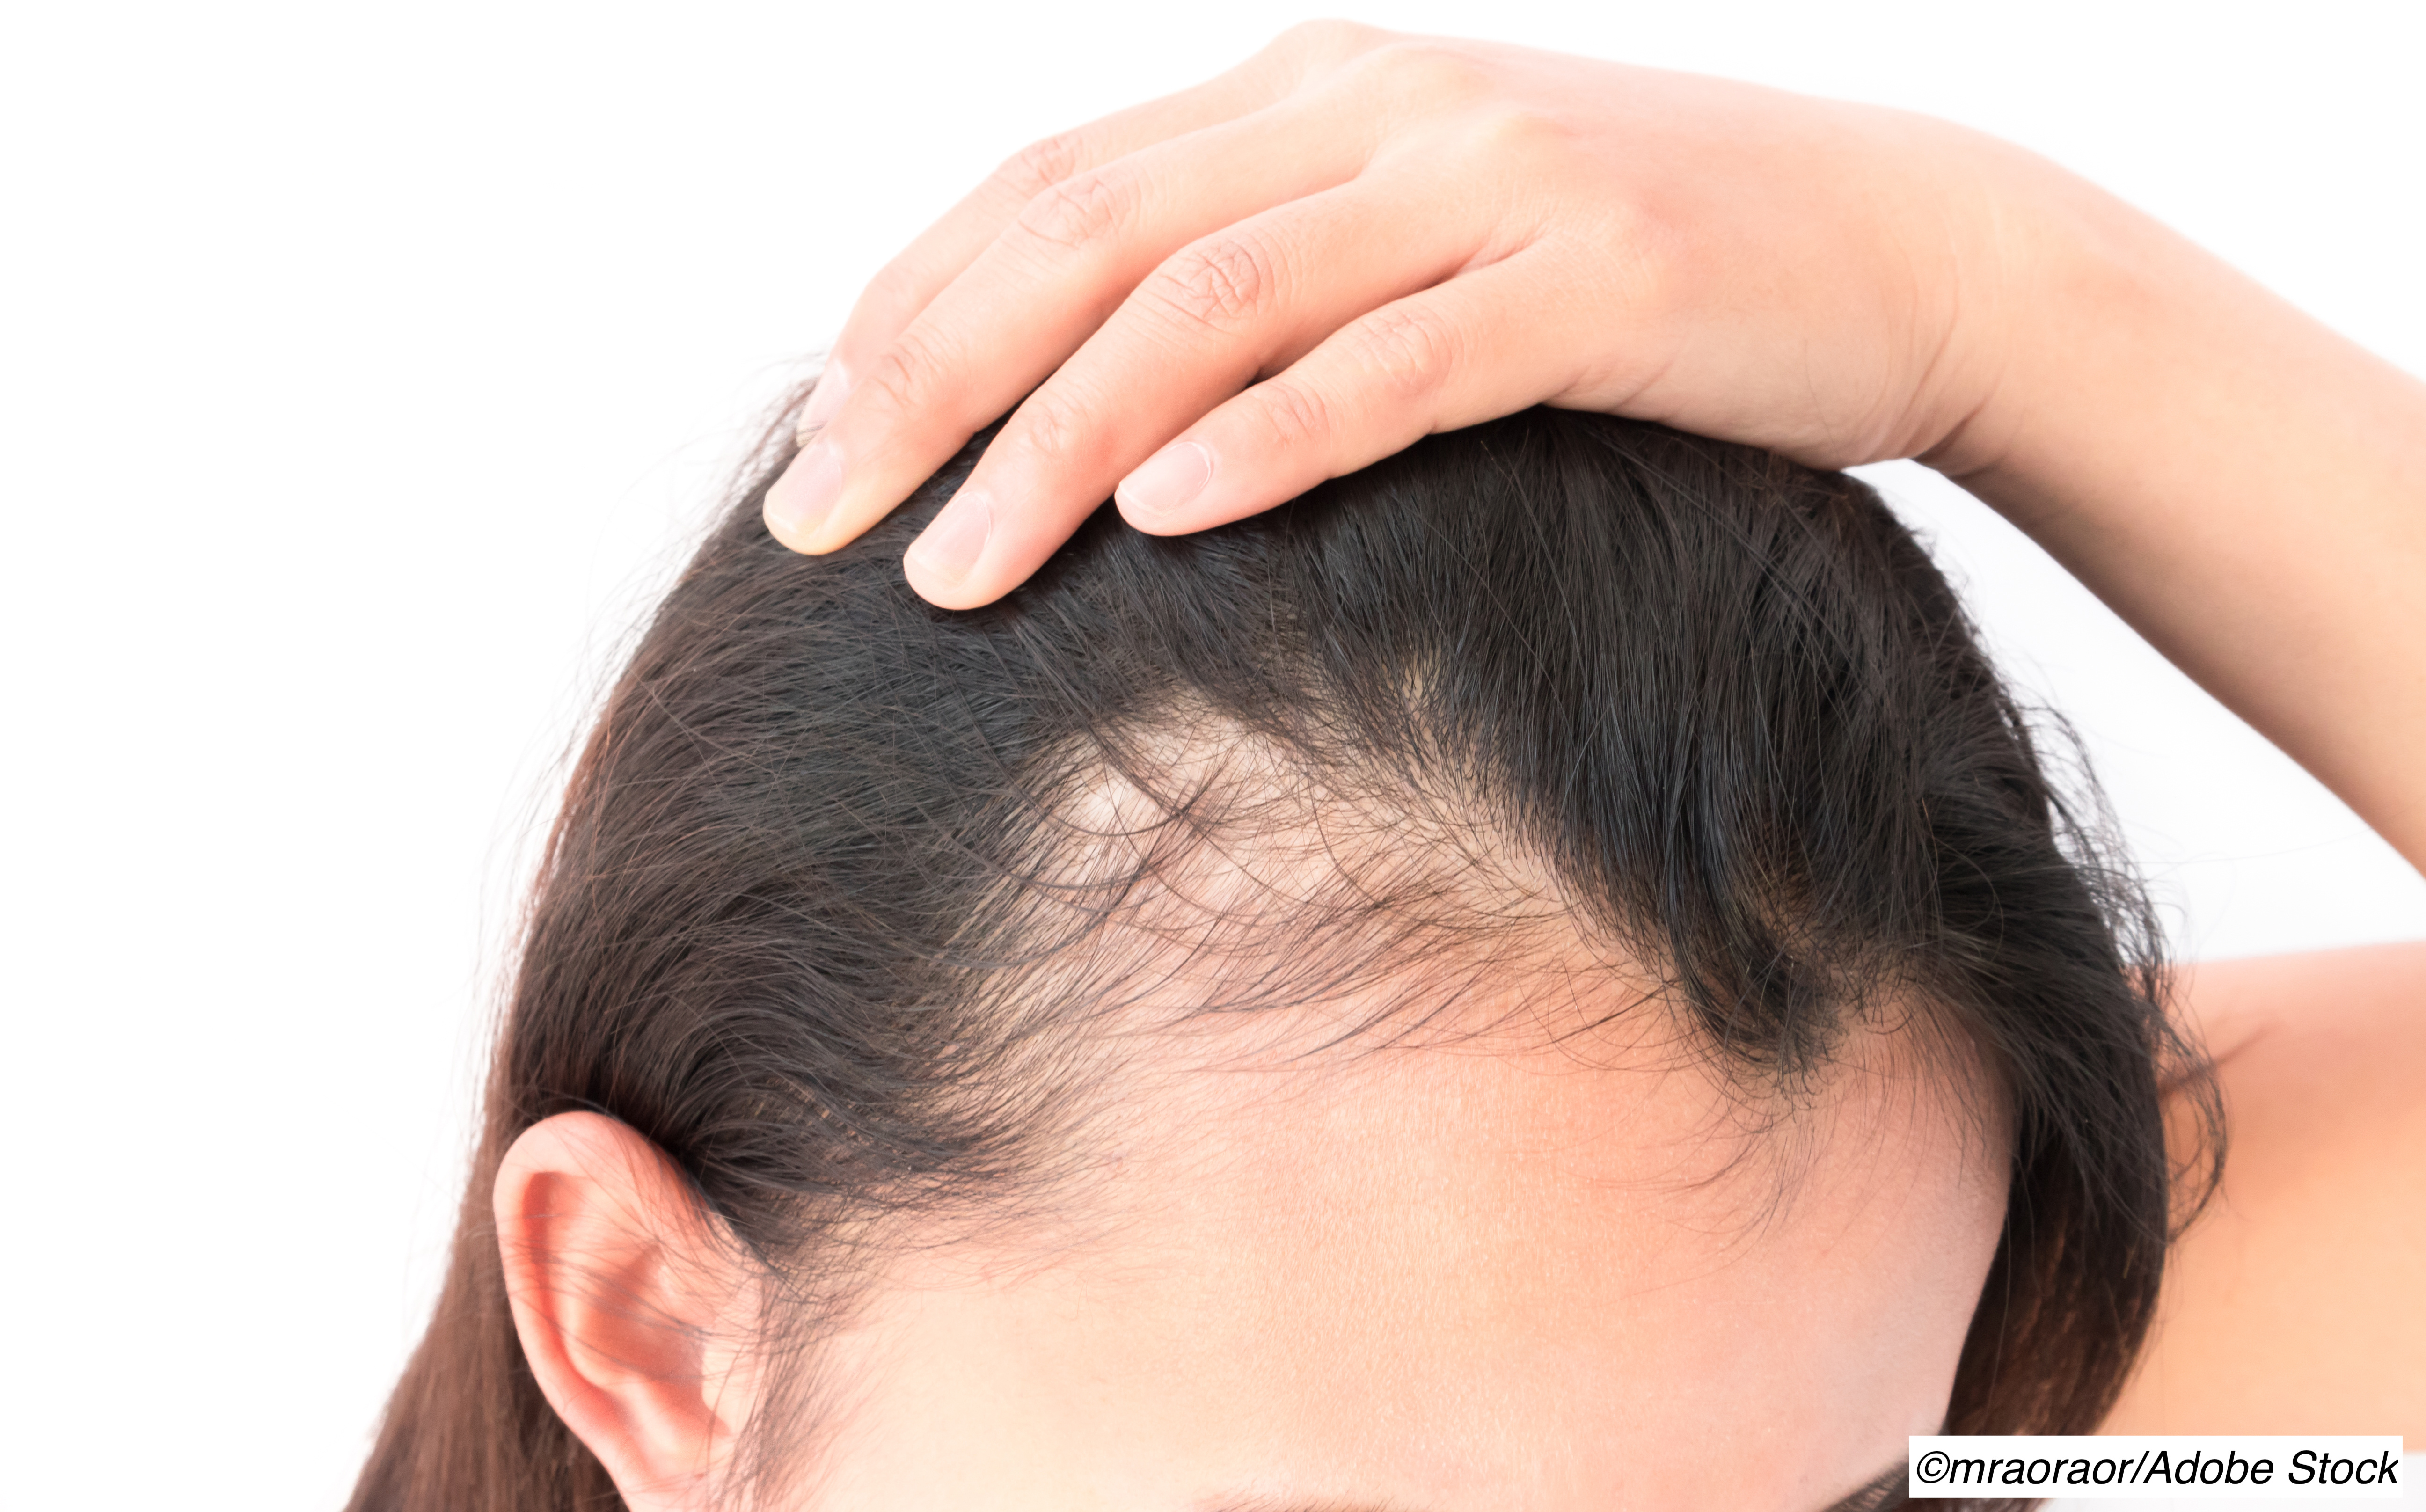 Lim ejendom Tjen Low-Dose Oral Minoxidil Deemed Safe for Hair Growth - Physician's Weekly